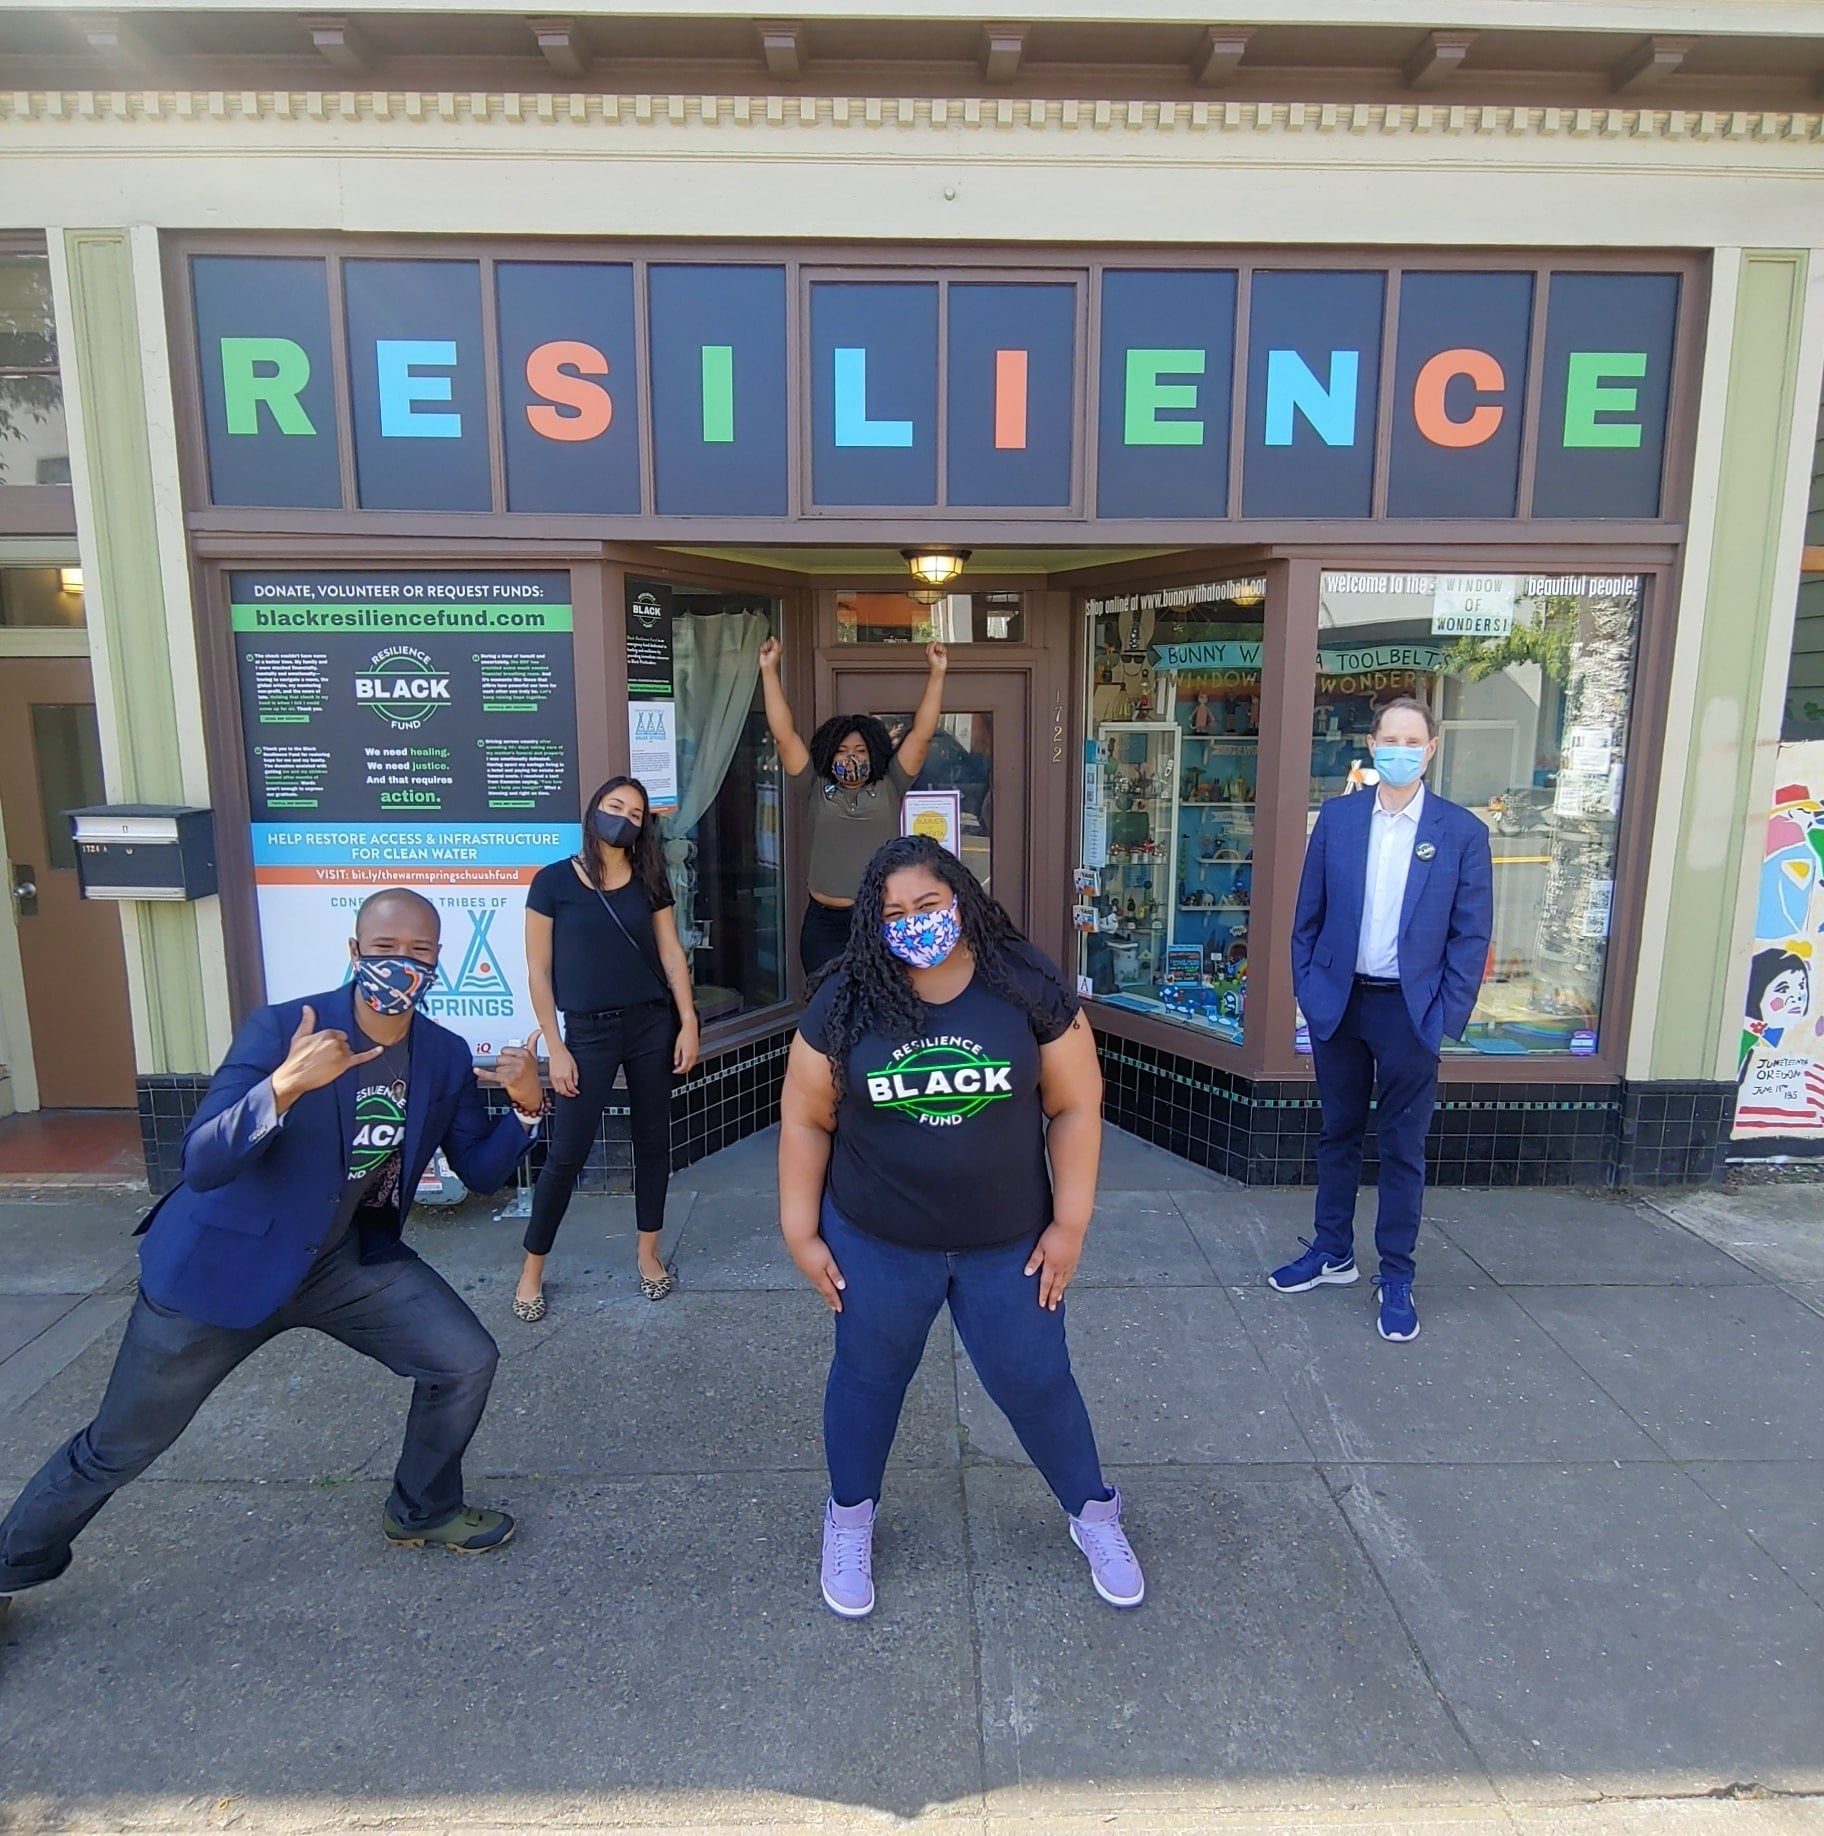 People pose in front on a storefront that says Resilience in block letters.